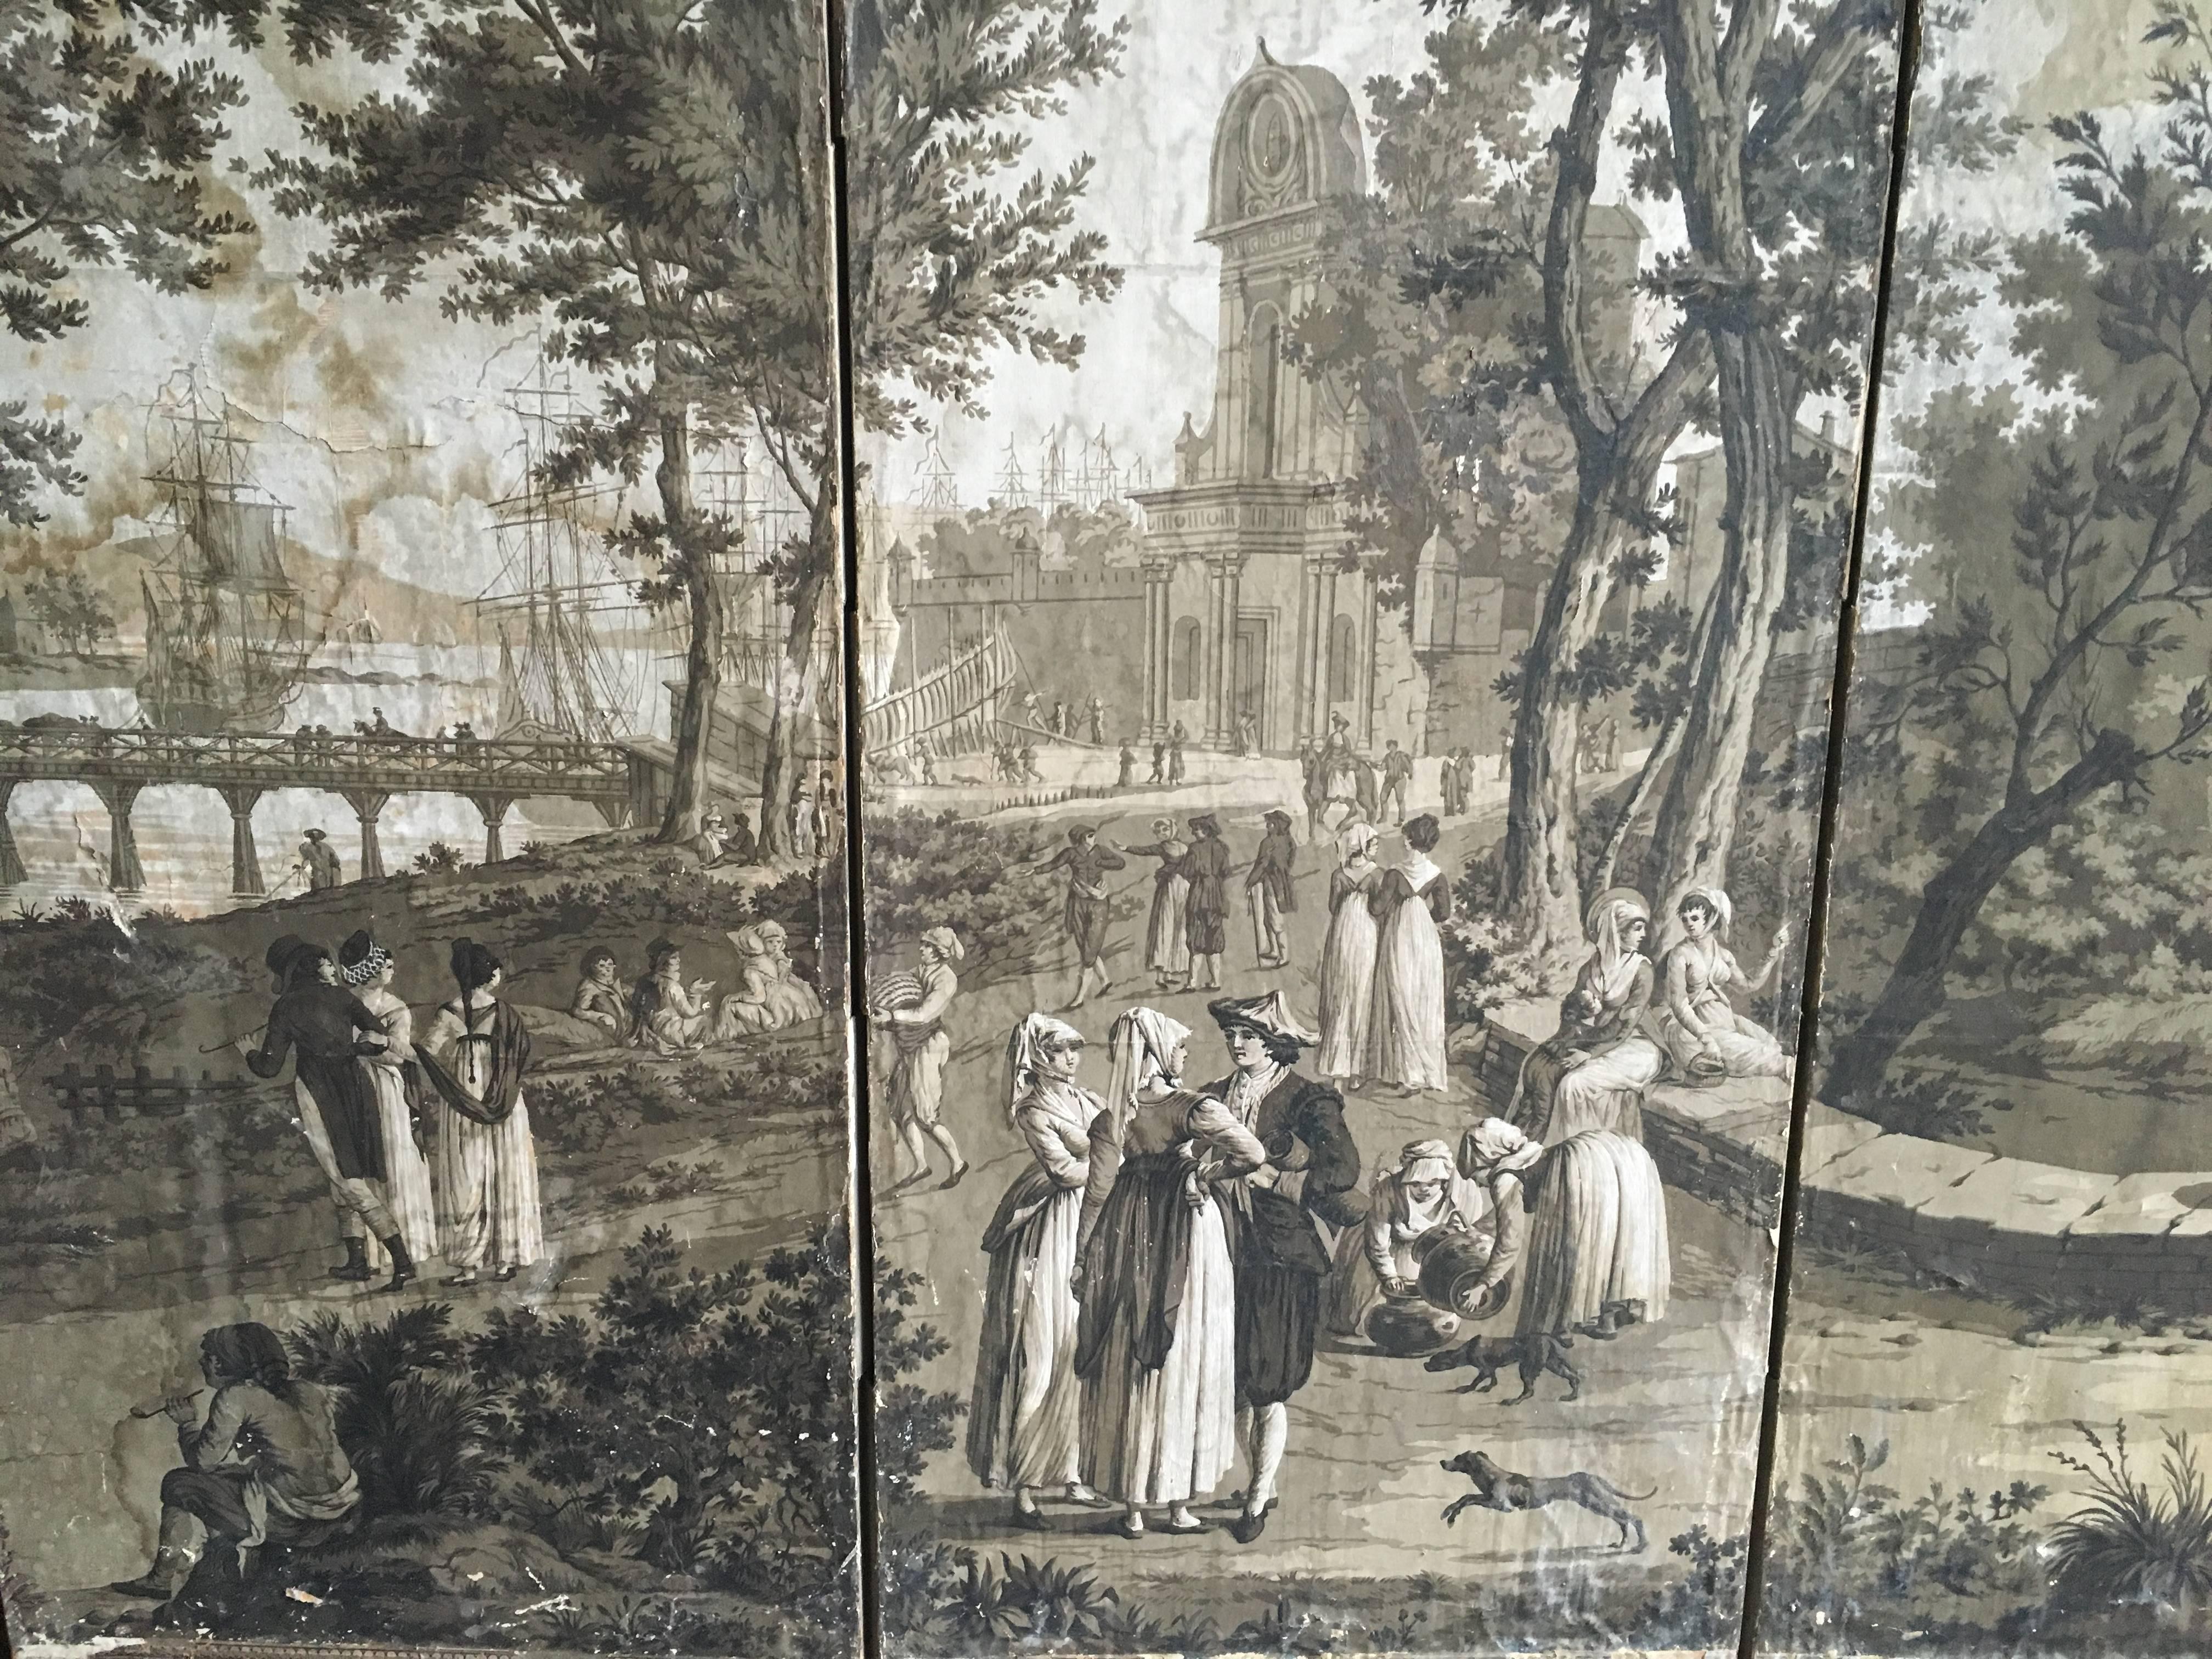 An early 19th century four panel French wallpaper screen from the series "Ports de France" by Joseph Dufour et Cie, Paris.
Designed by Jean-Gabriel Charvet (1750-1829).
Original edition 1810-1815 Block printed Grisaille.

Joseph Dufour